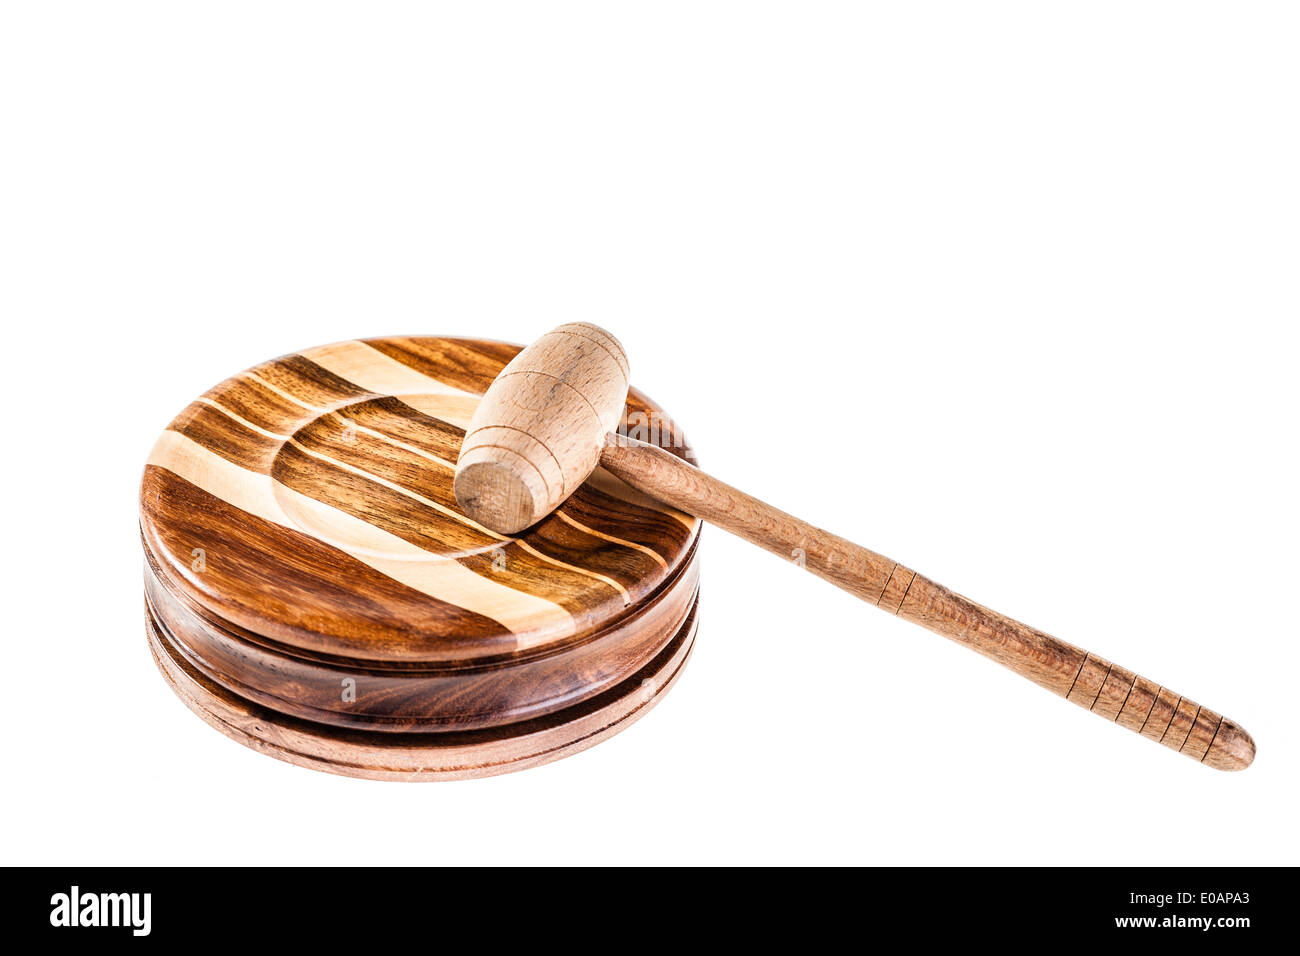 a judge's hammer made of wood and isolated over a white background Stock Photo